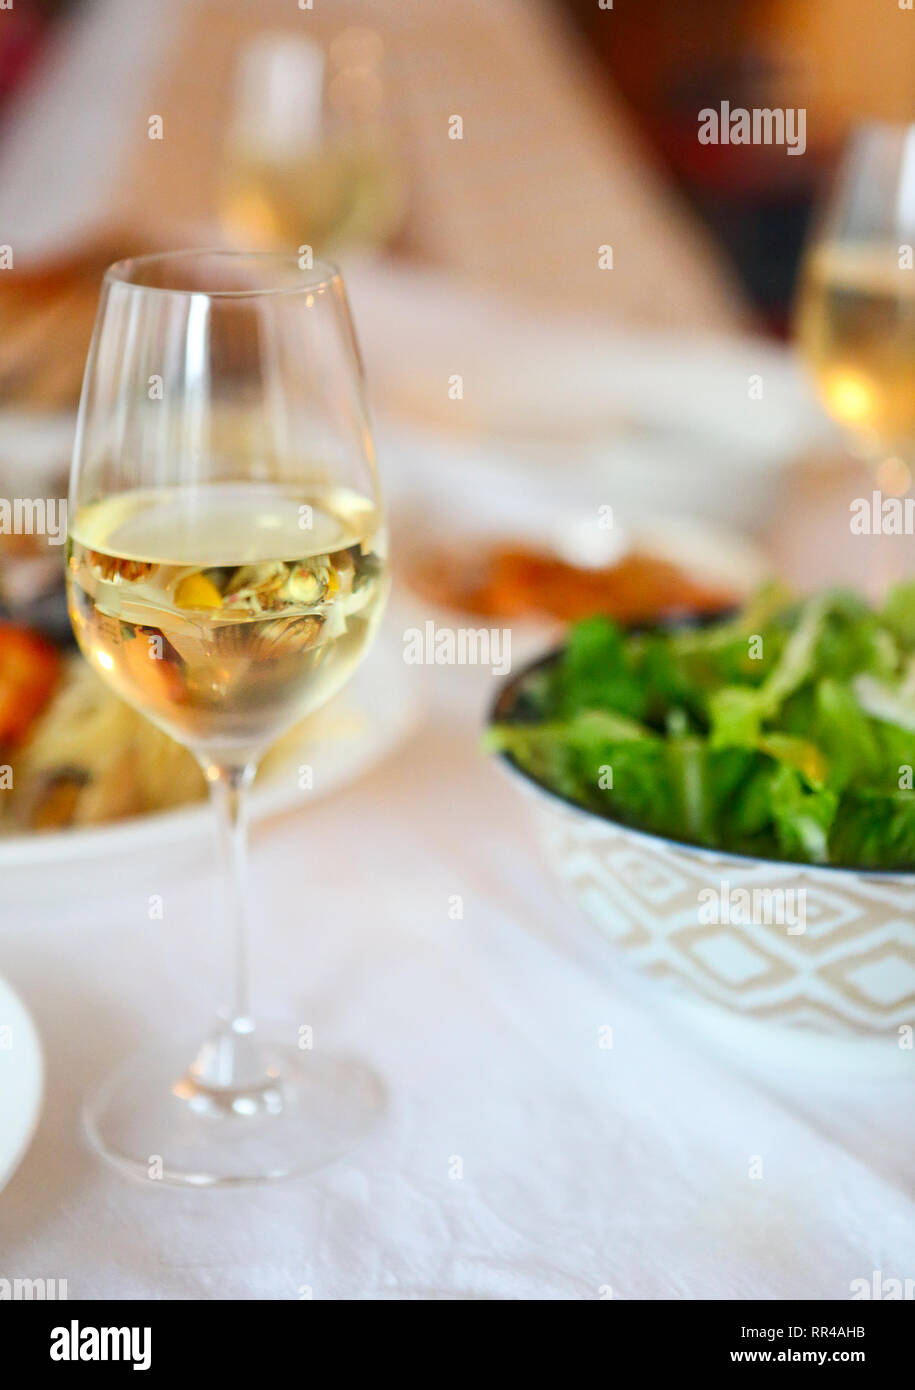 People fine dining seafood and white wine on the table. Stock Photo